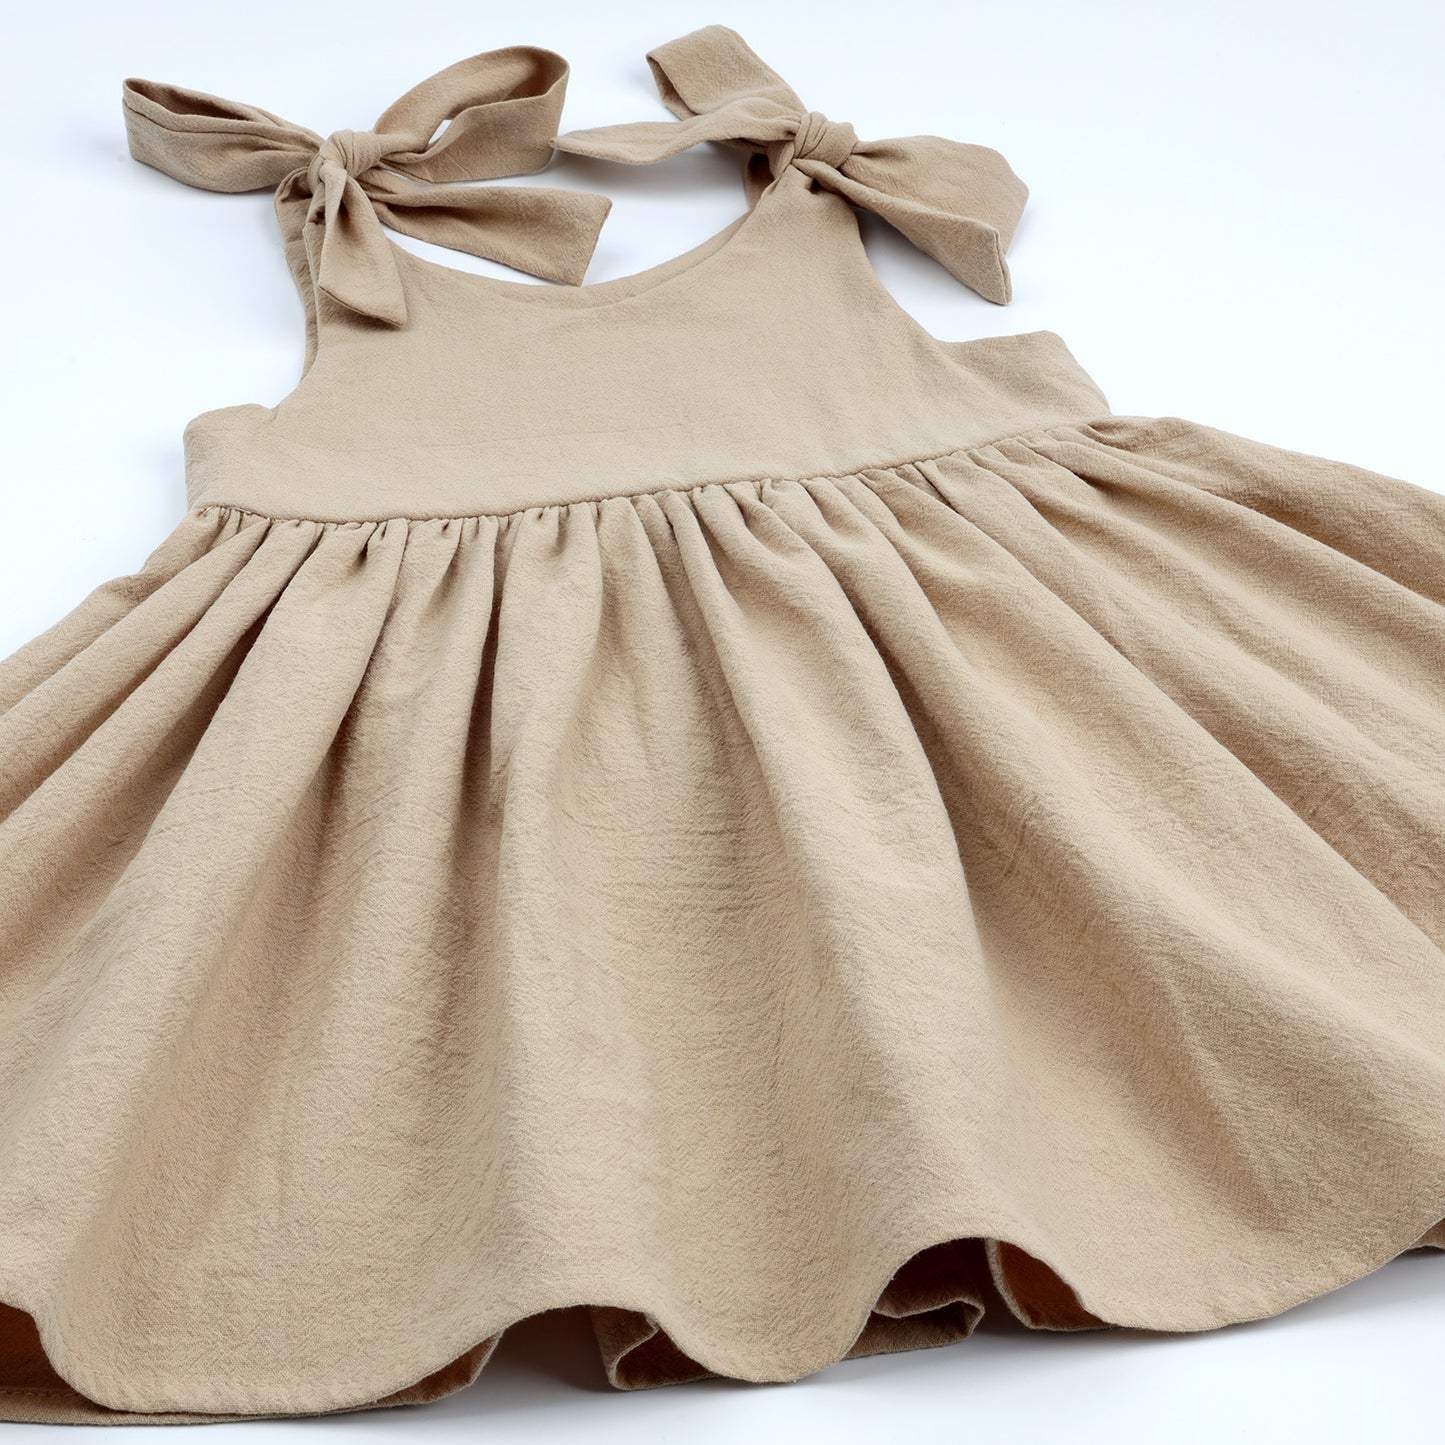 Baby Toddler Girls 100% Cotton Solid Color Slip Dress Cotton and Linen Texture Large Hemline